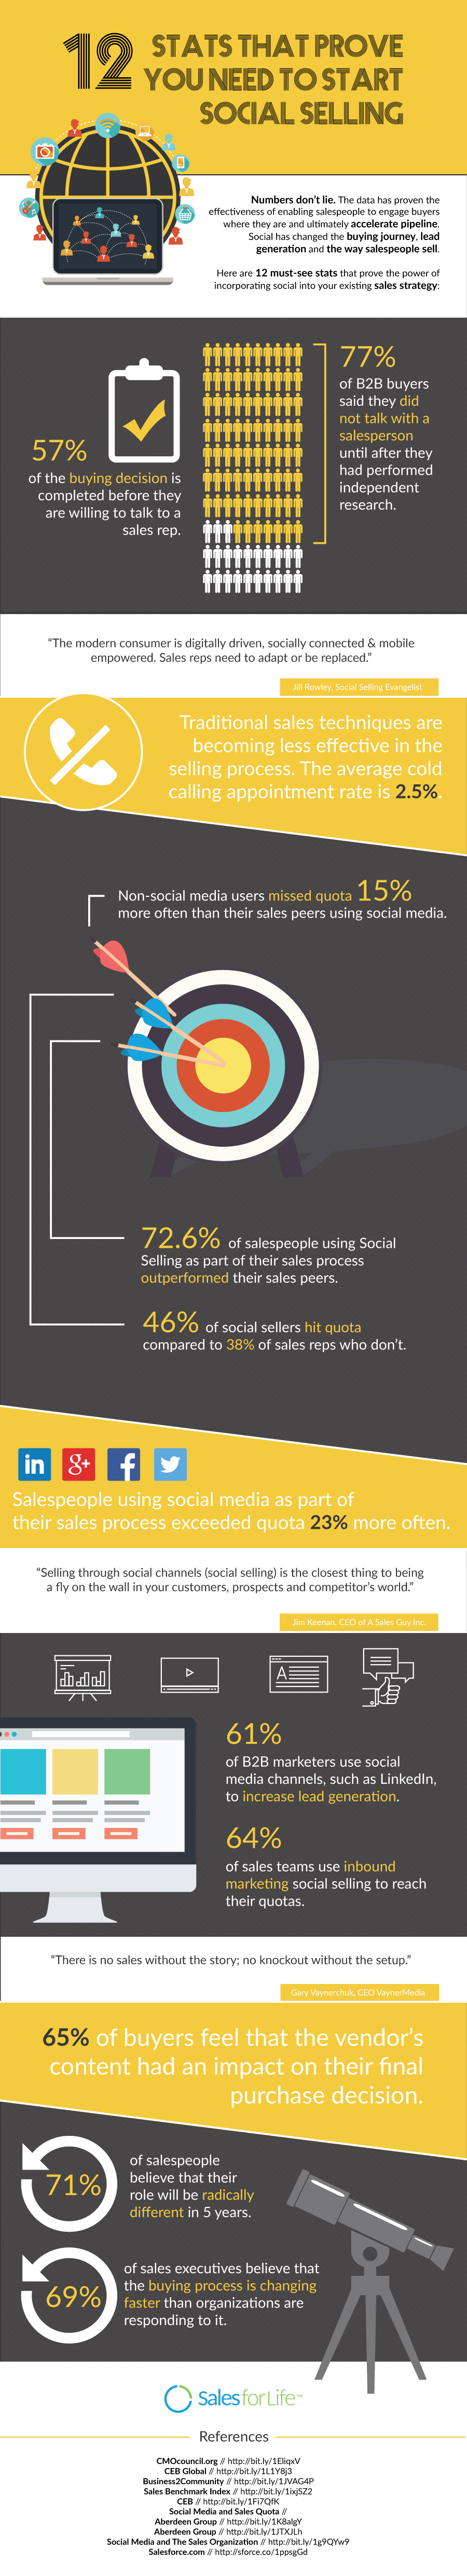 12-stats-that-prove-you-need-to-start-social-selling1